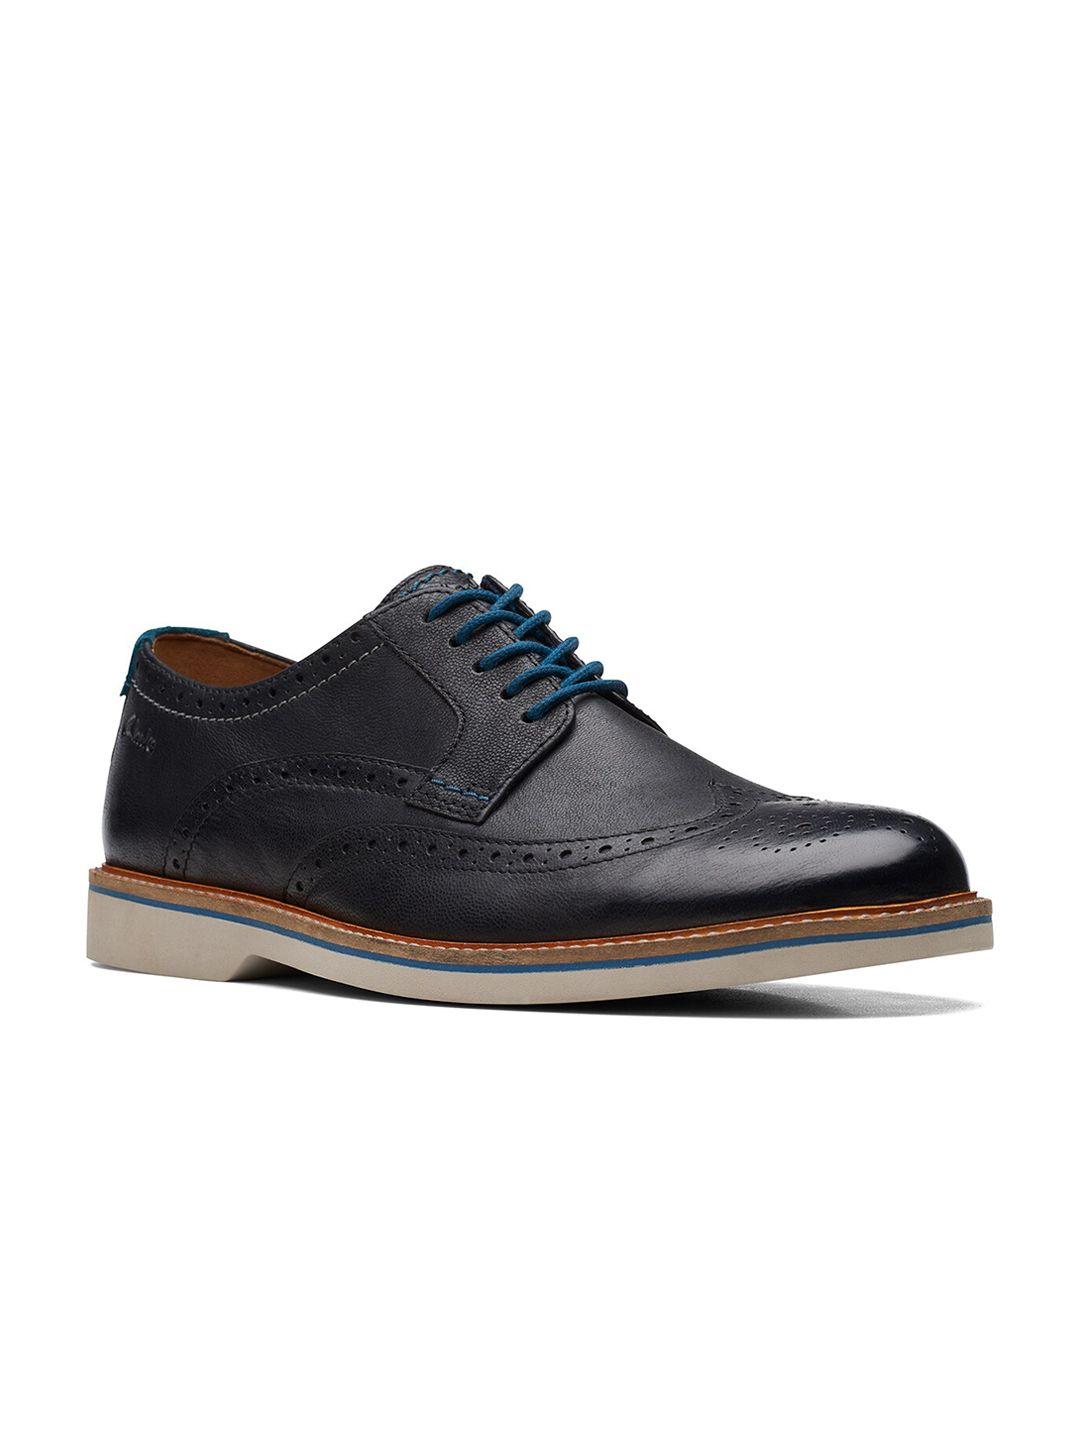 clarks men perforated textured leather derbys